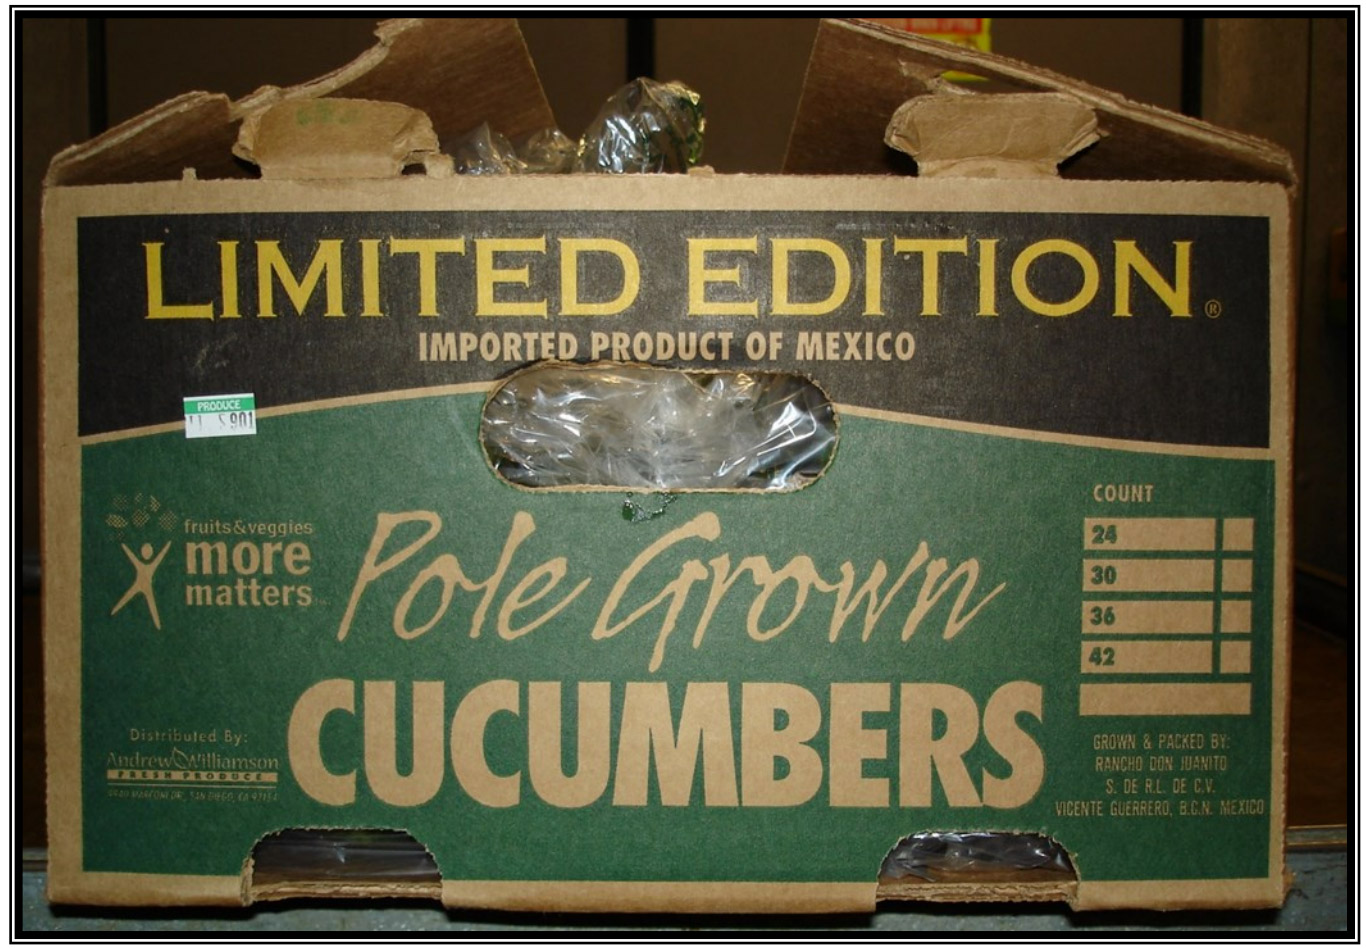 Salmonella-Contaminated Cucumbers Have Killed 3 People, Hospitalized 112